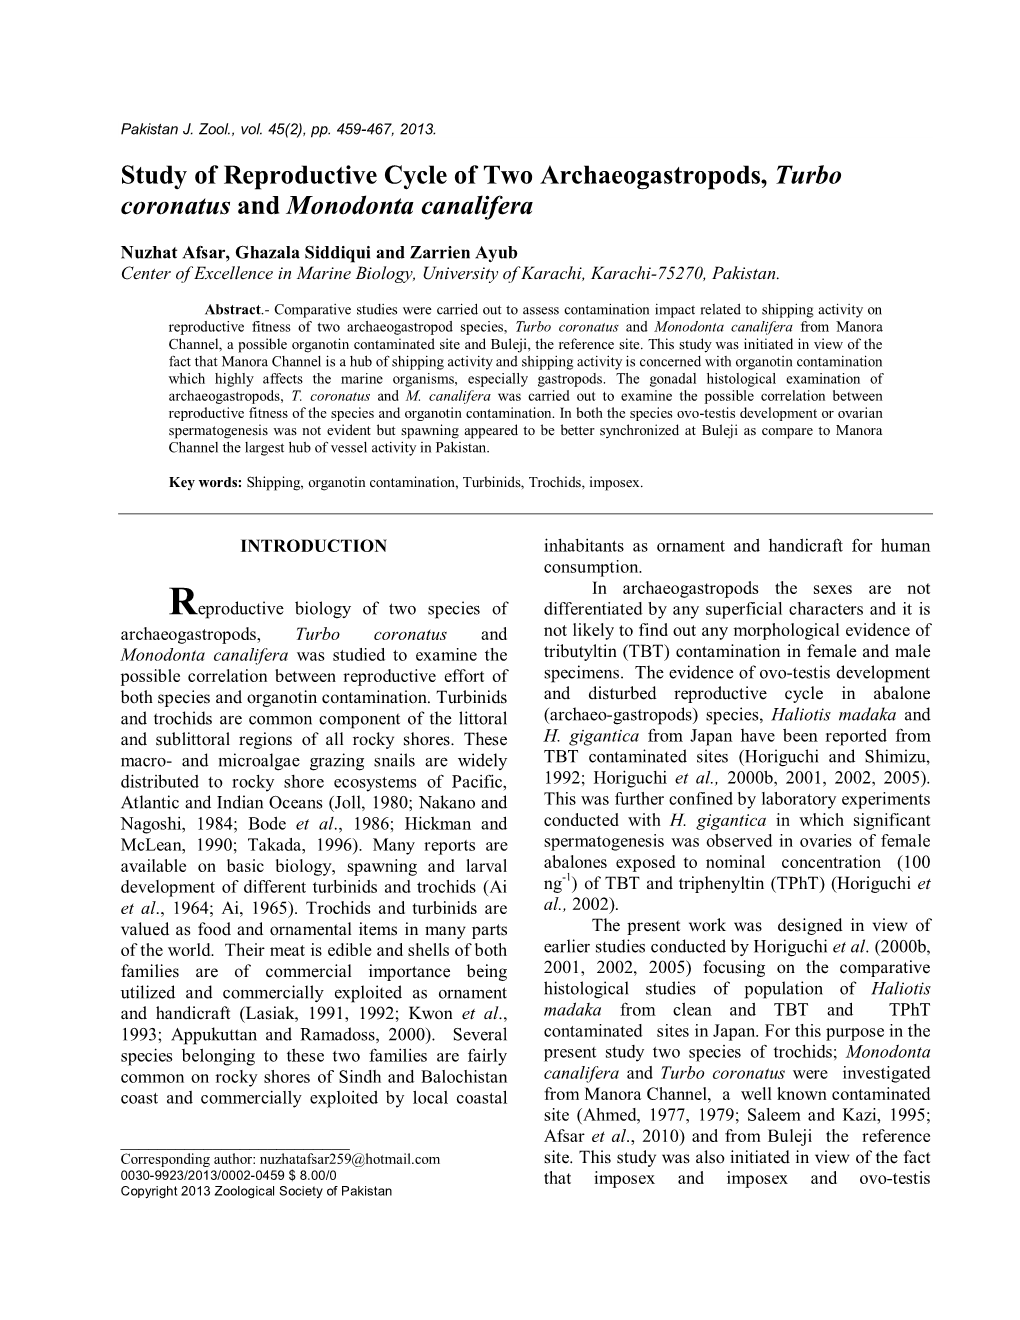 Study of Reproductive Cycle of Two Archaeogastropods, Turbo Coronatus and Monodonta Canalifera